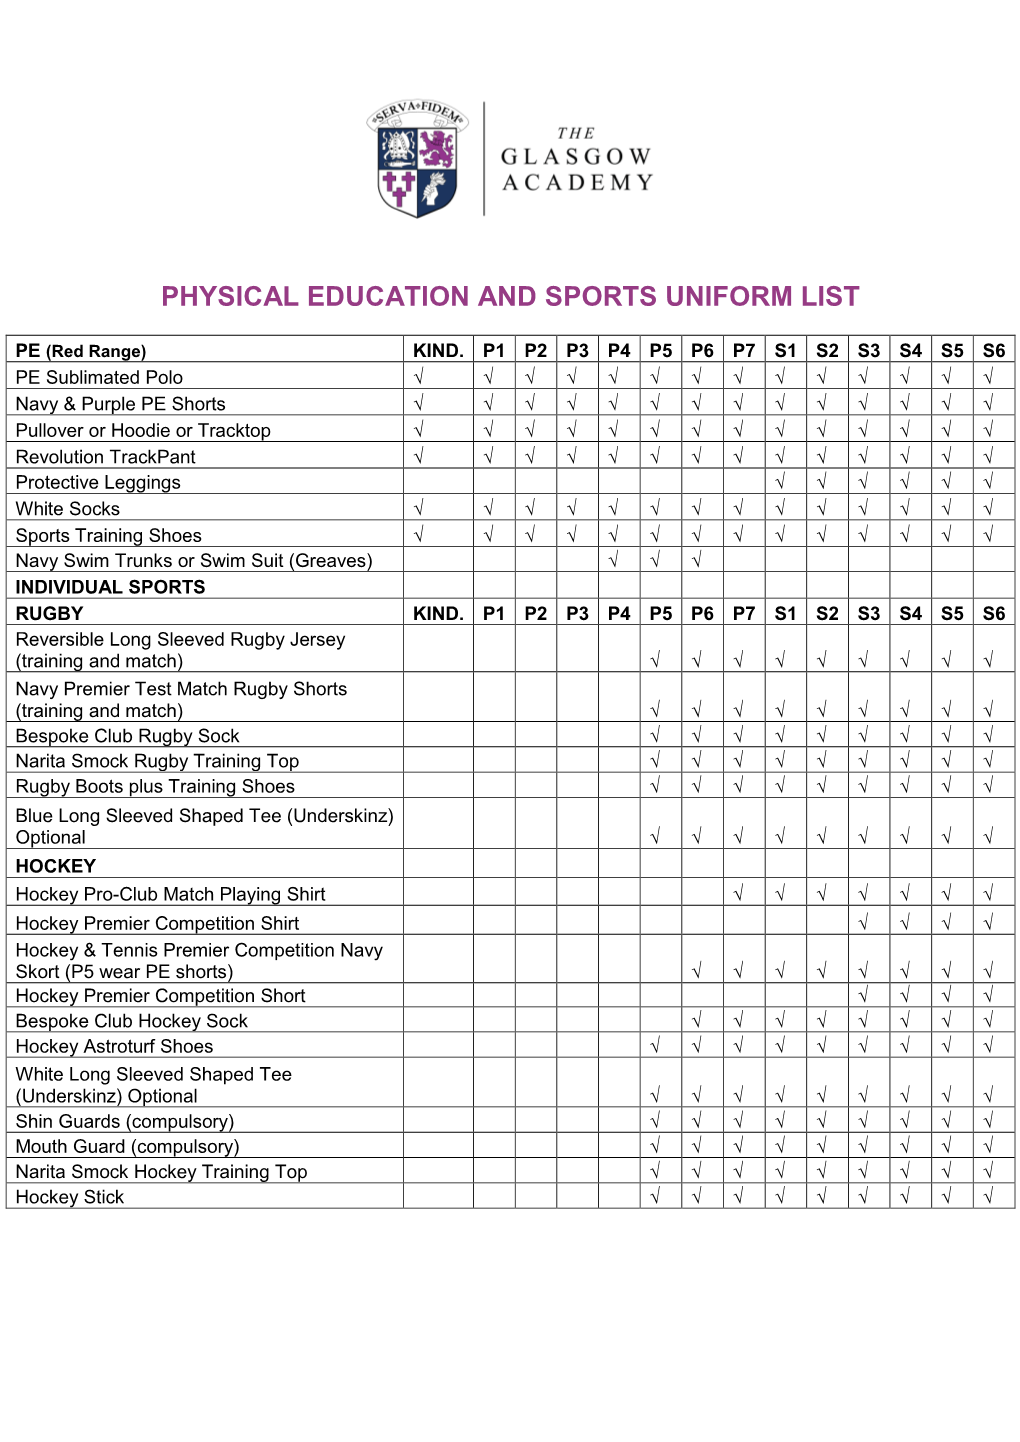 Physical Education and Sports Uniform List